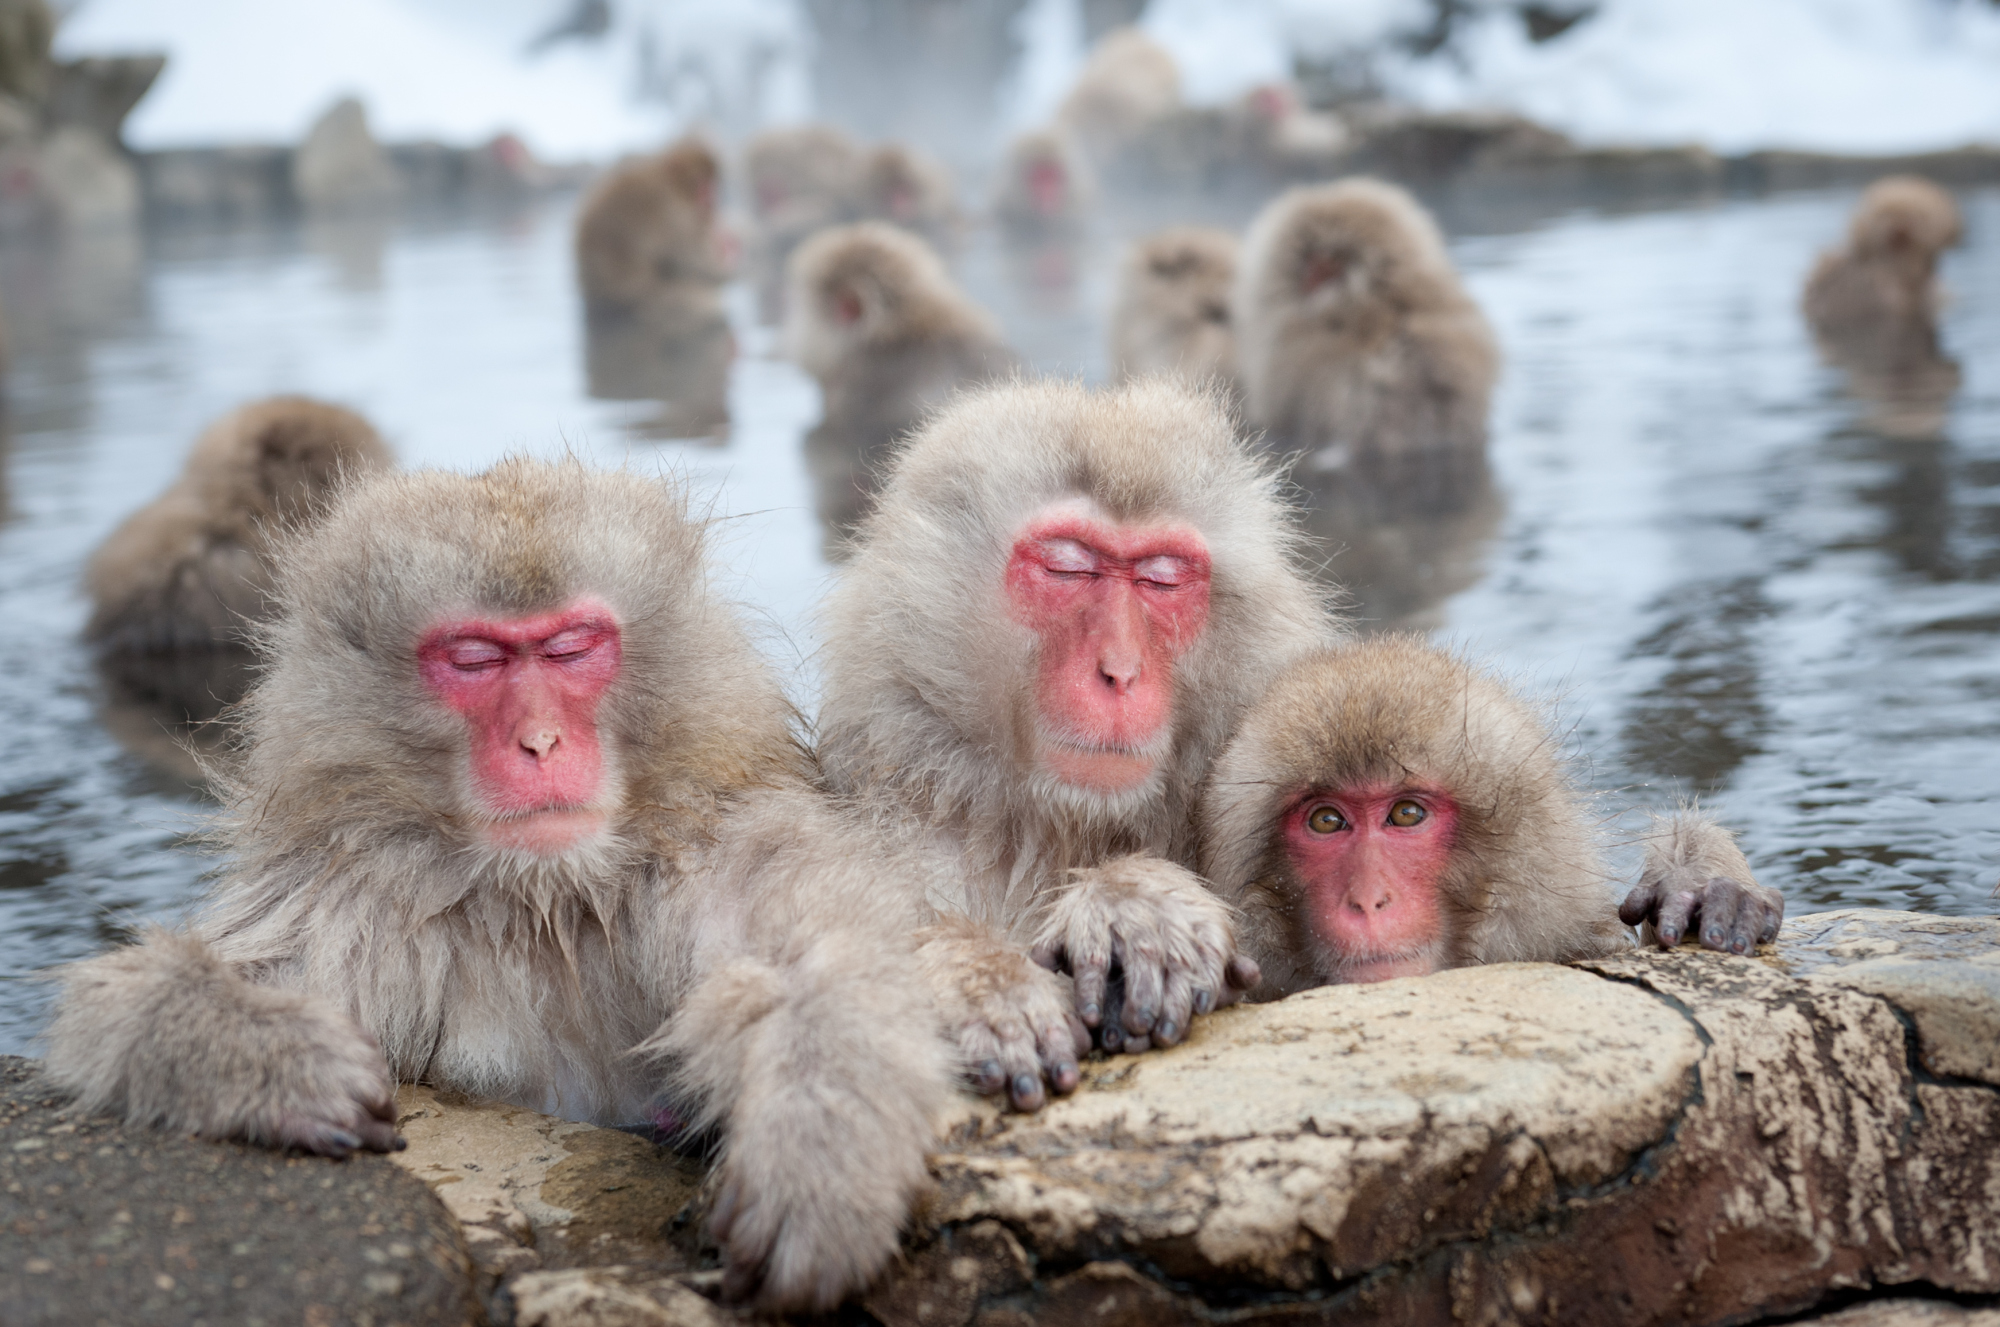 Nagano's snow monkeys bathe in hot springs to relieve stress, study ...